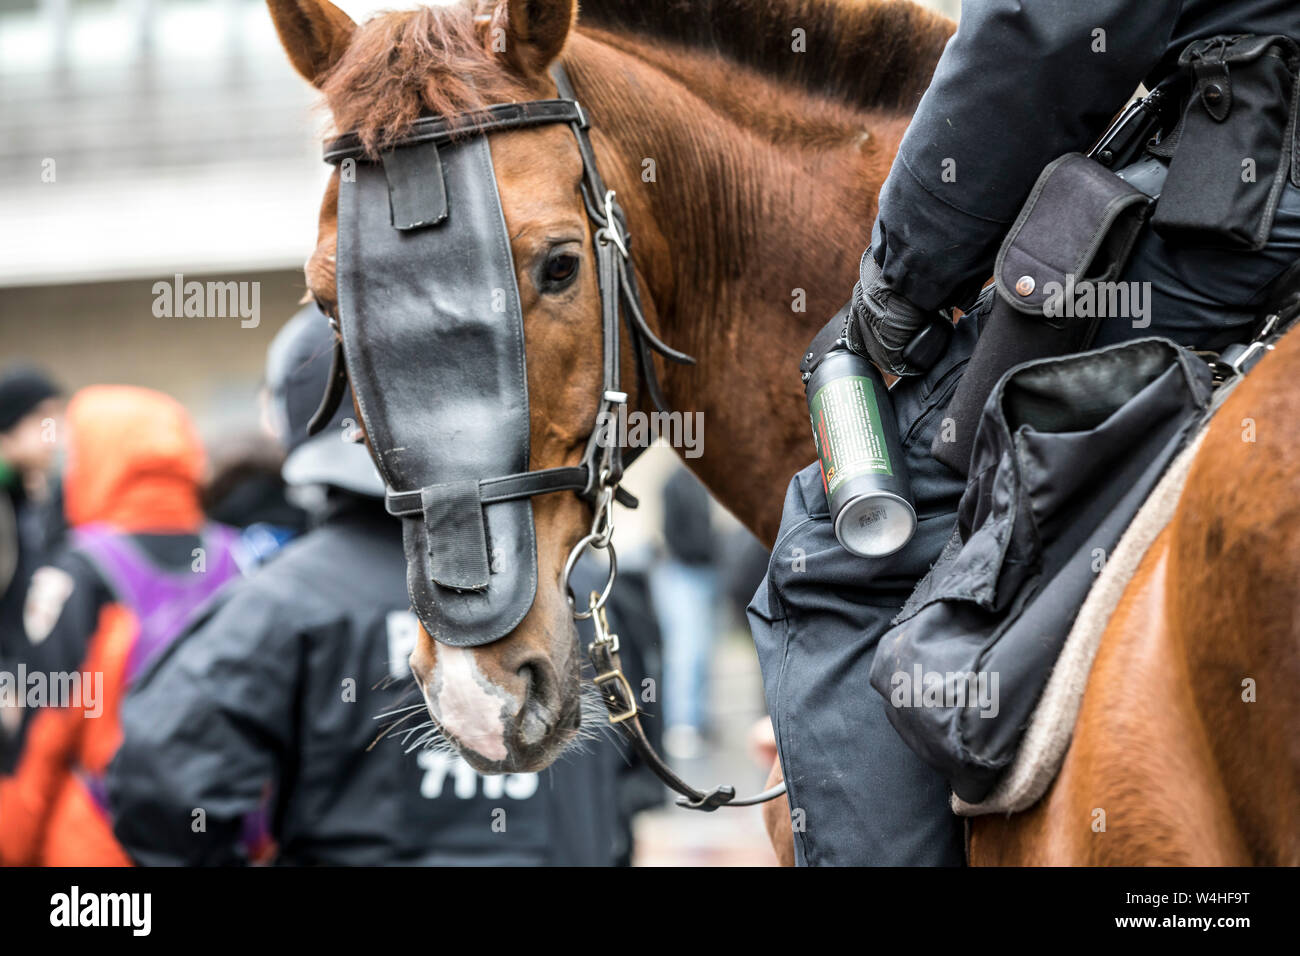 Police horse, riding squadron, policeman with pepper spray can, Stock Photo